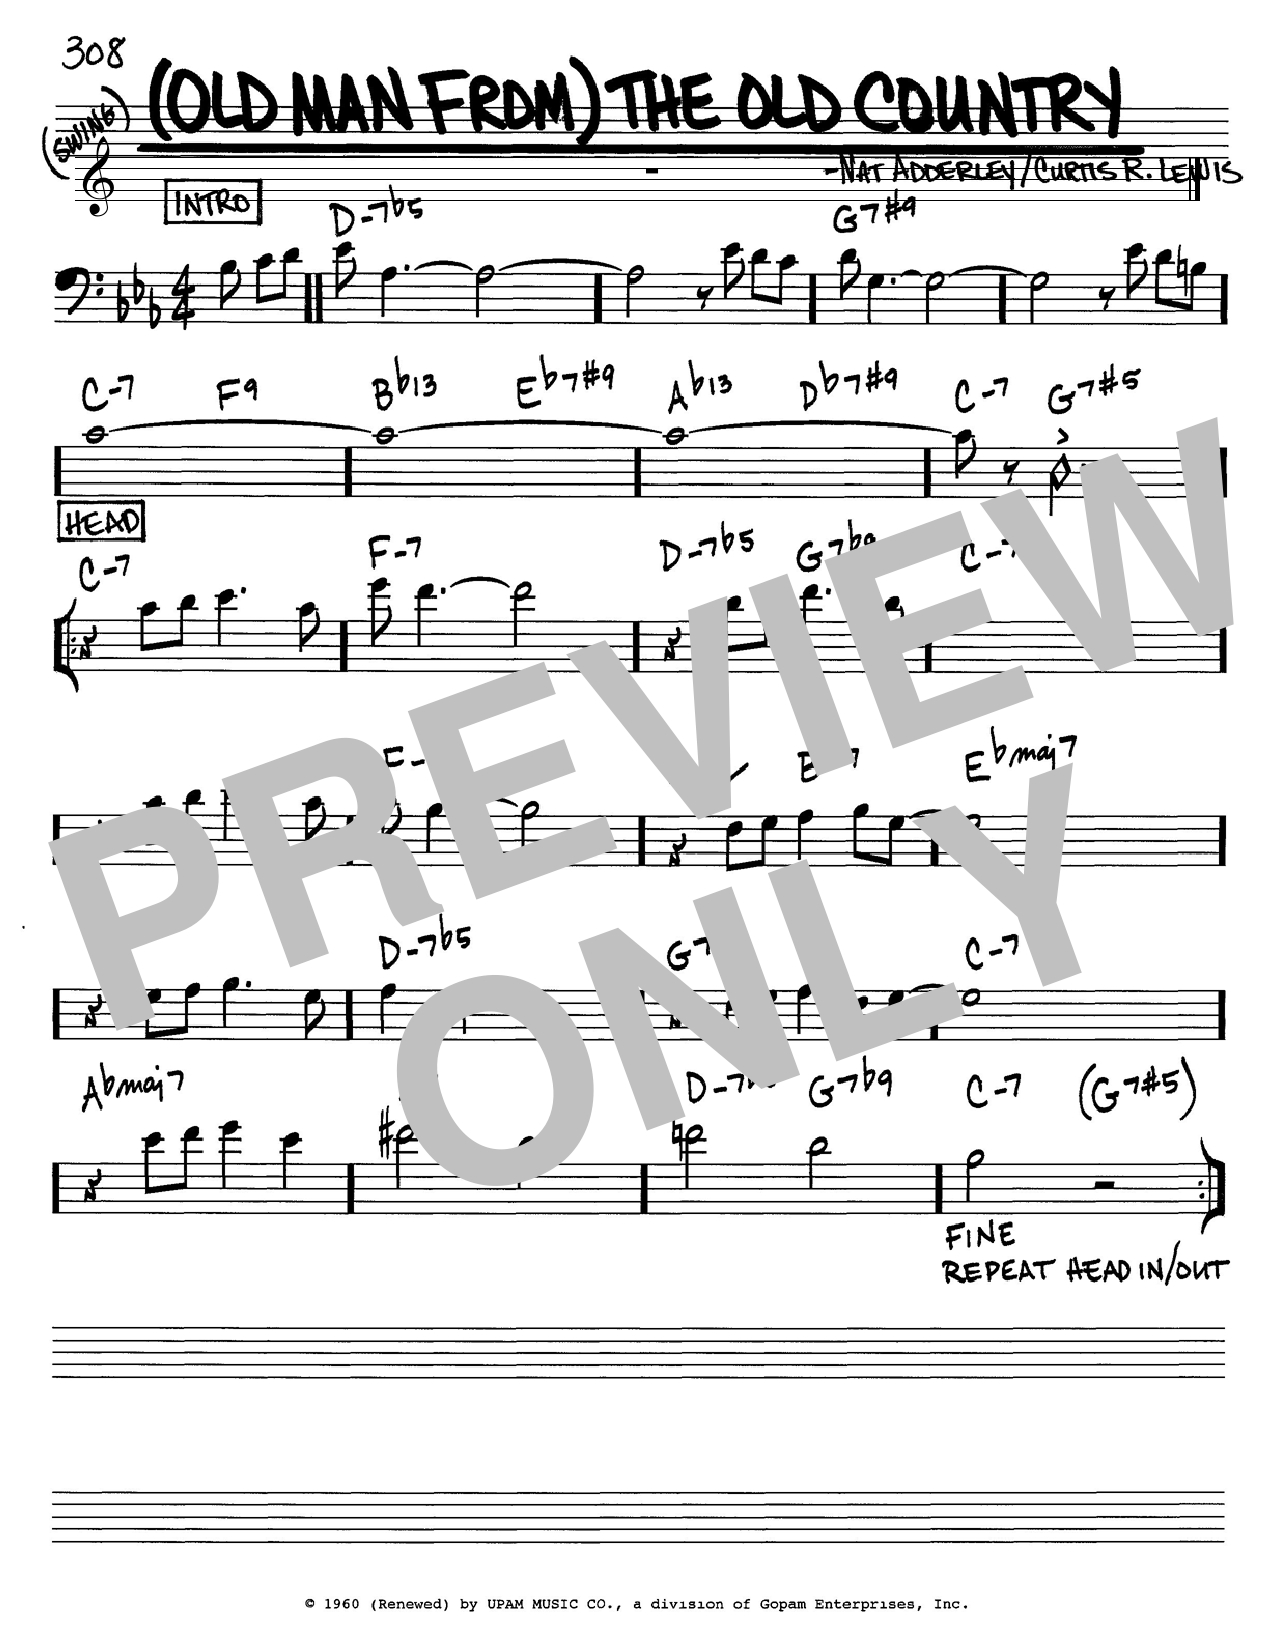 Old Man Chords Old Man From The Old Country Nat Adderley Real Book Melody Chords Digital Sheet Music